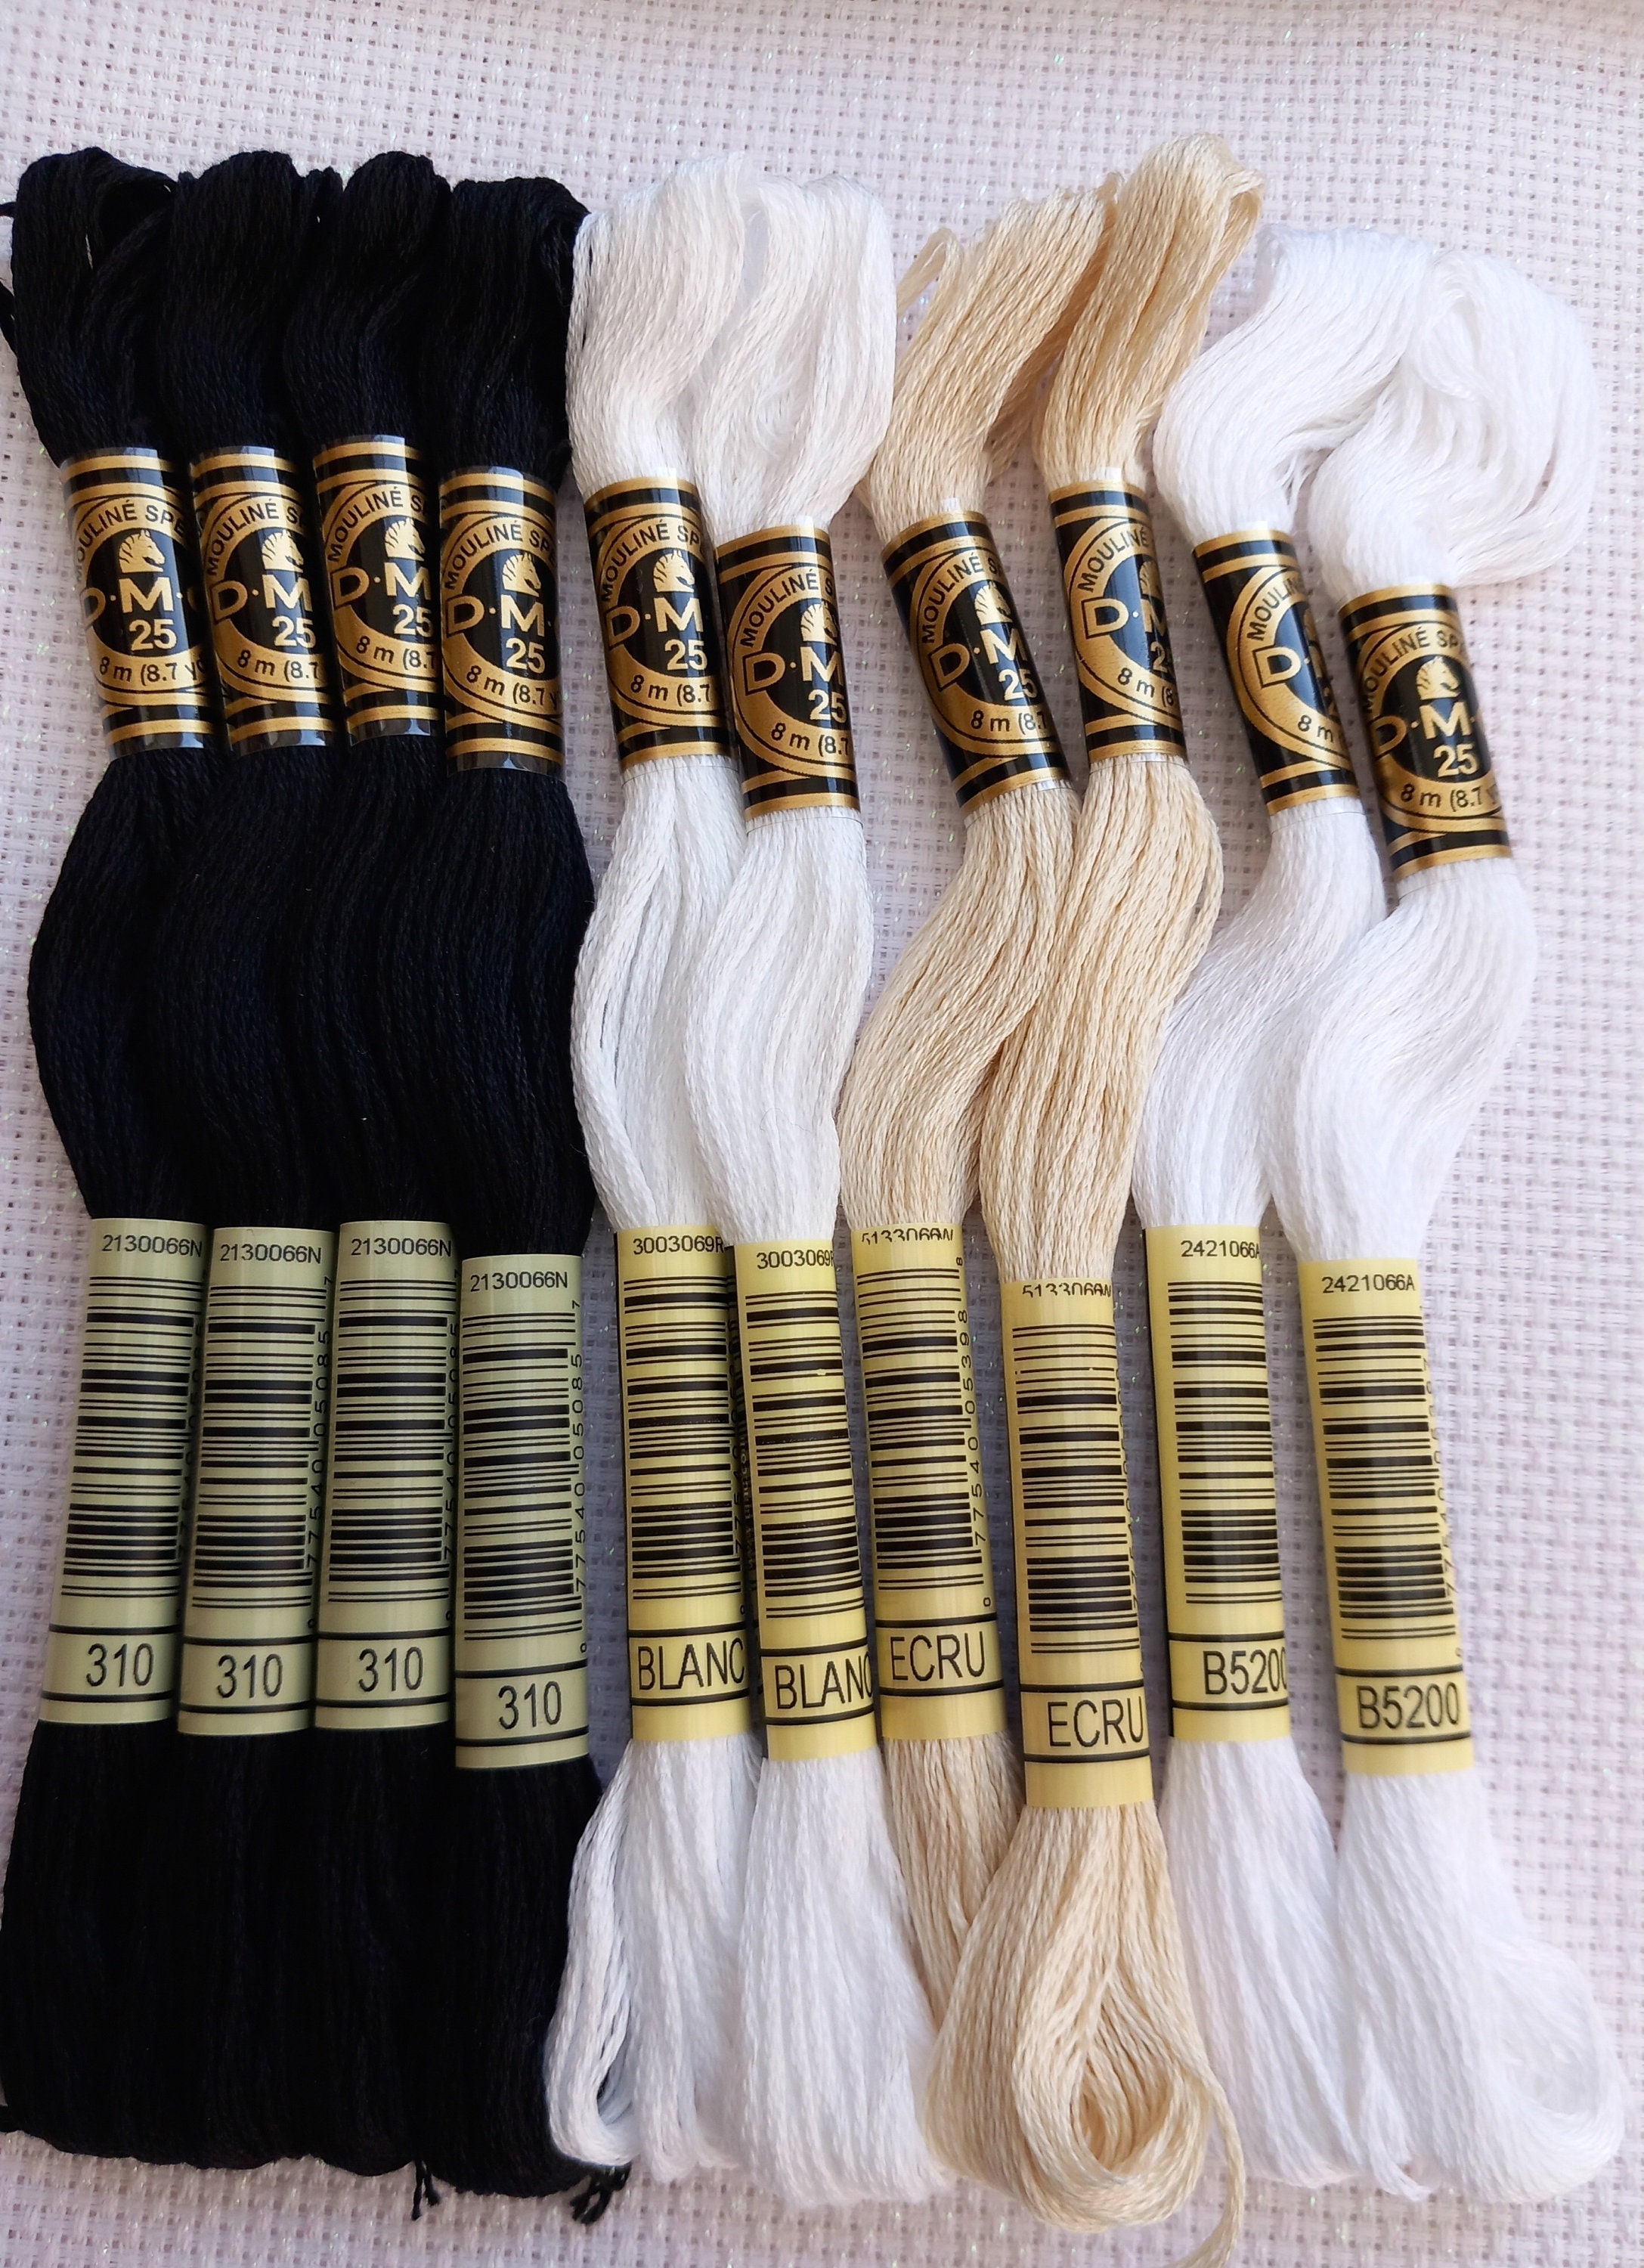 DMC Floss-6 Strand Embroidery Floss-variegated Colors-you Choose Color-felt  Crafts-embroidery-cross Stitch-black-white-ecru-variegated 